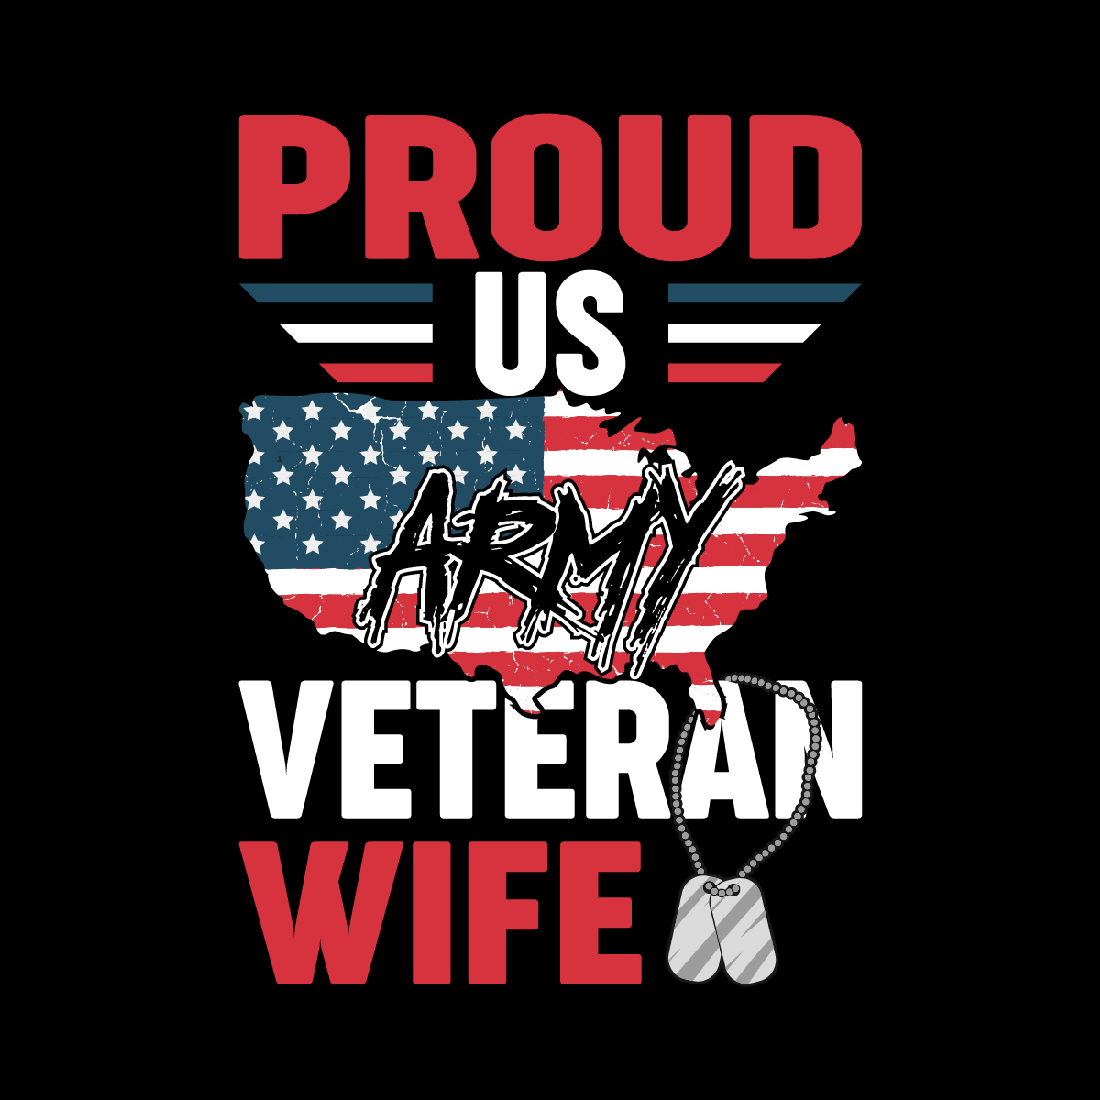 Proud US Army Veteran Wife T-shirt Design cover image.